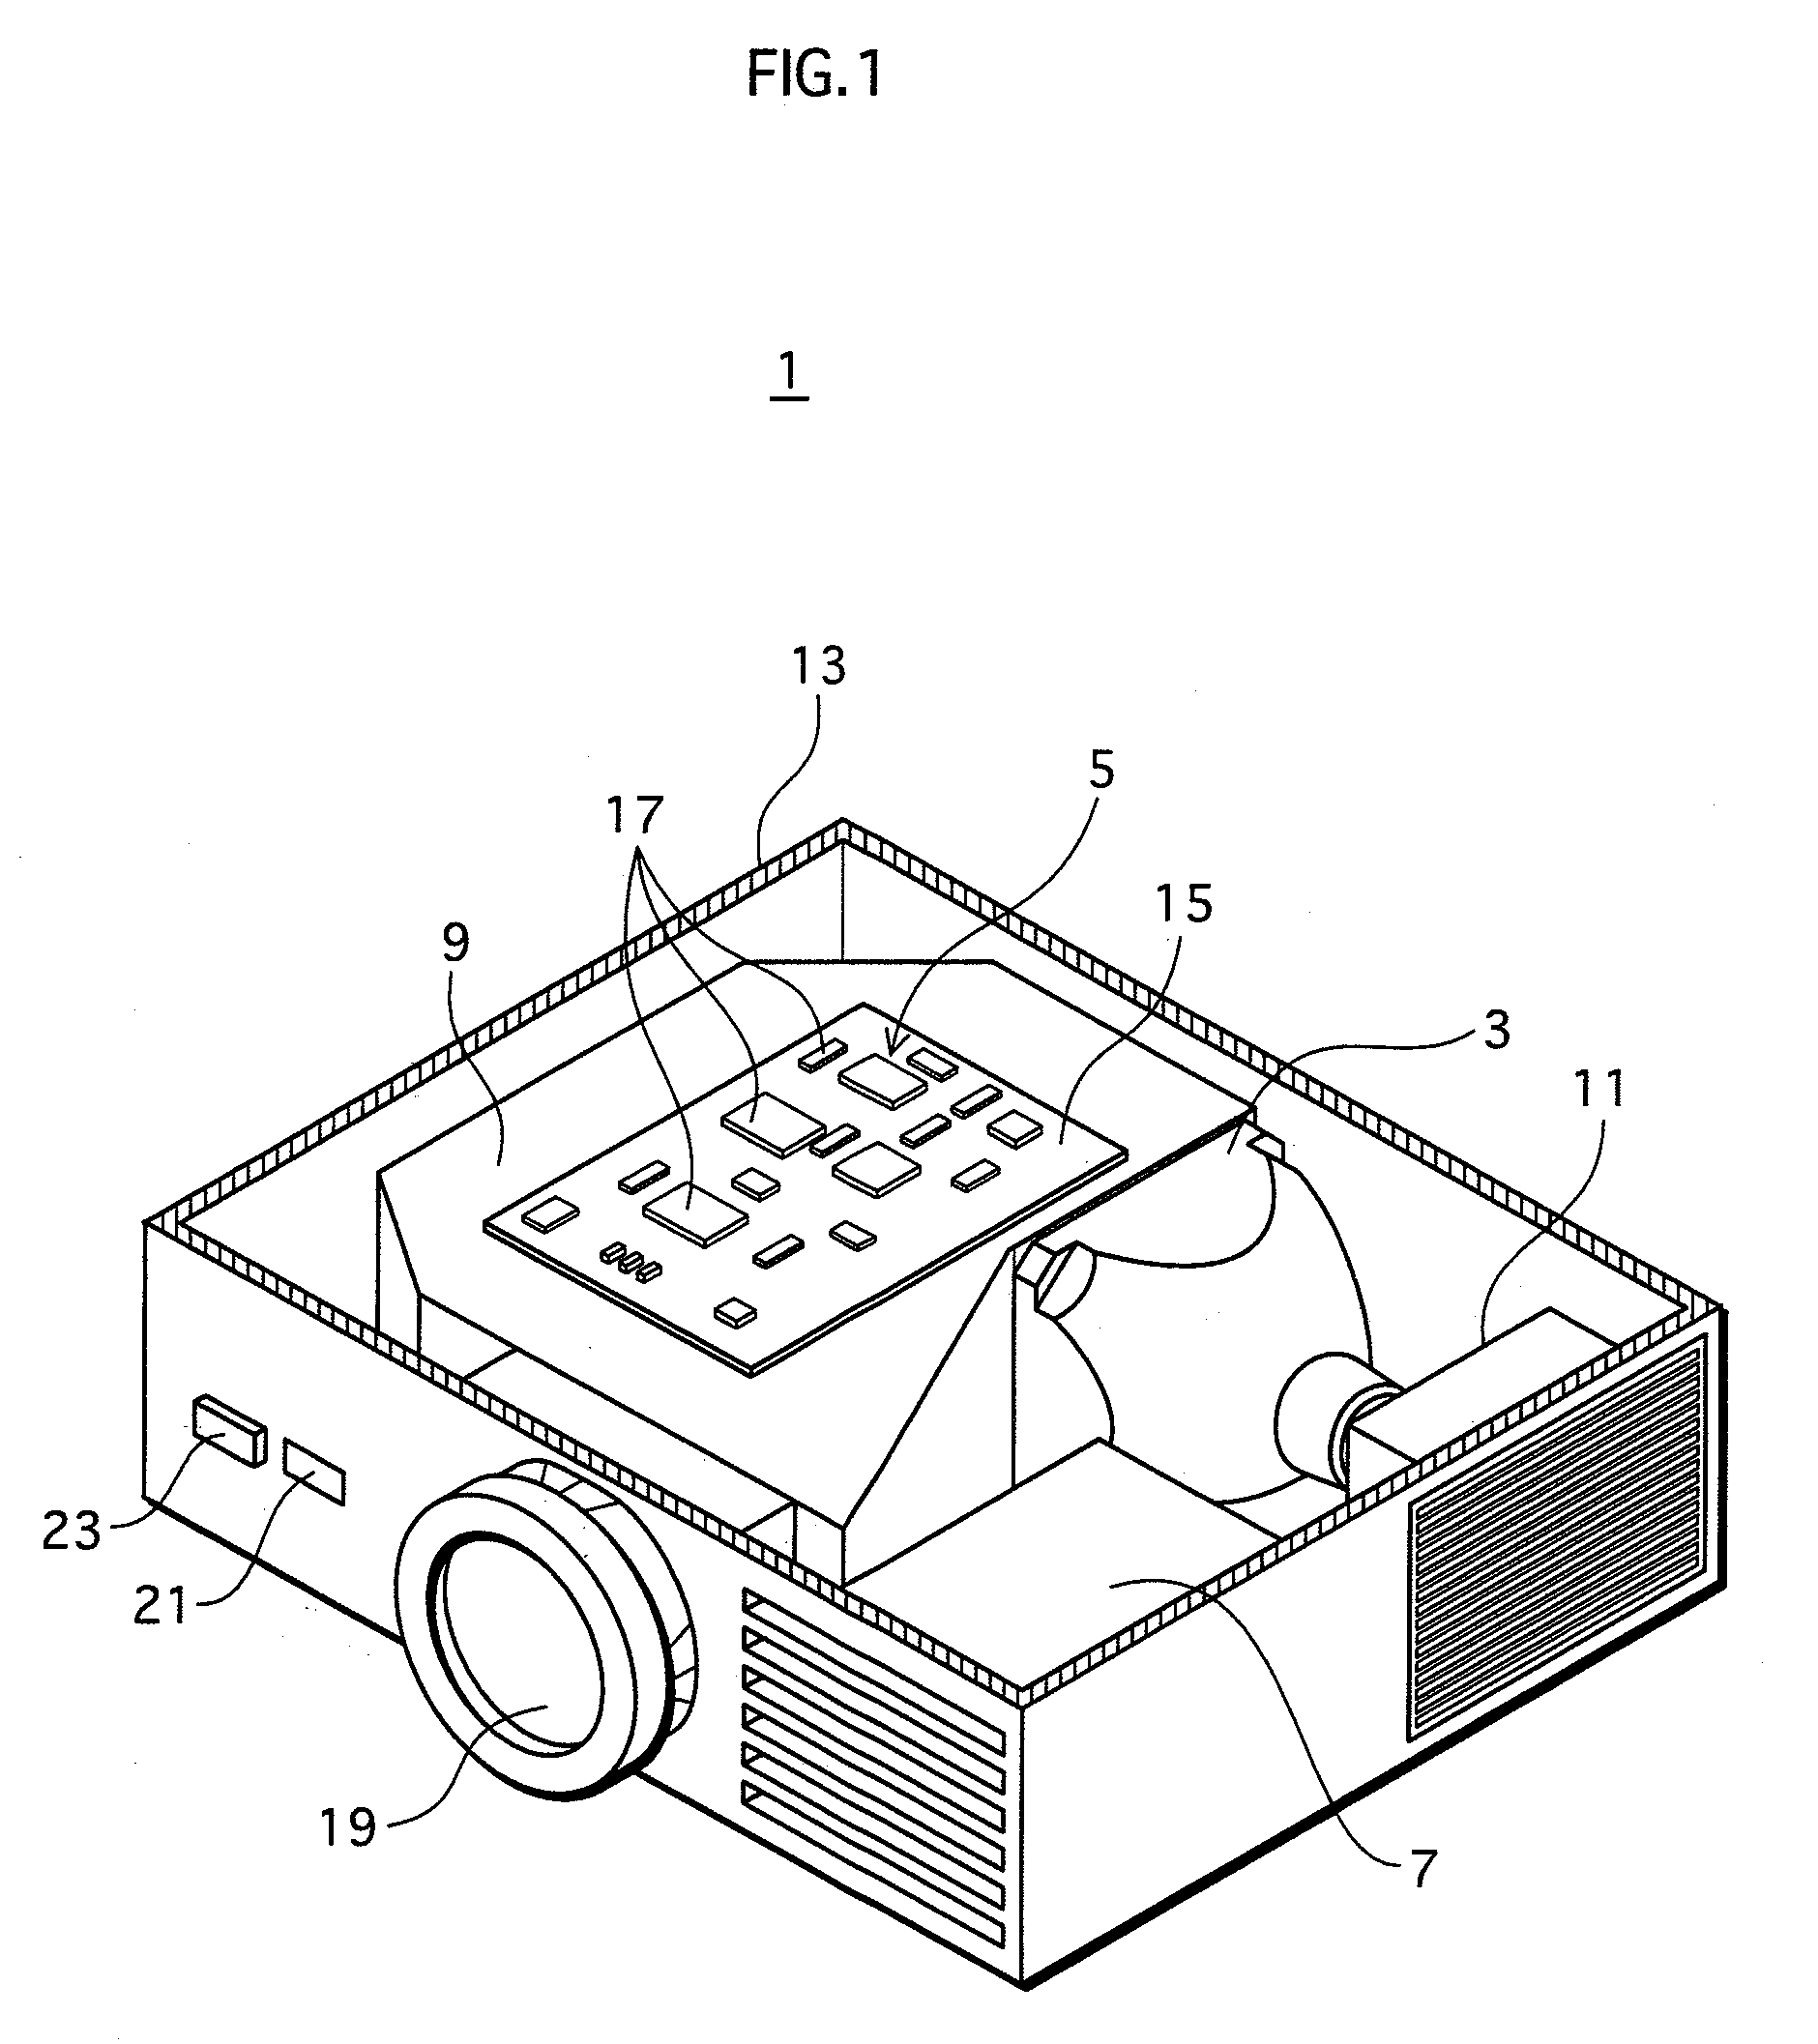 Projection-type image display apparatus, lighting apparatus and lighting method realizing an extended lifetime